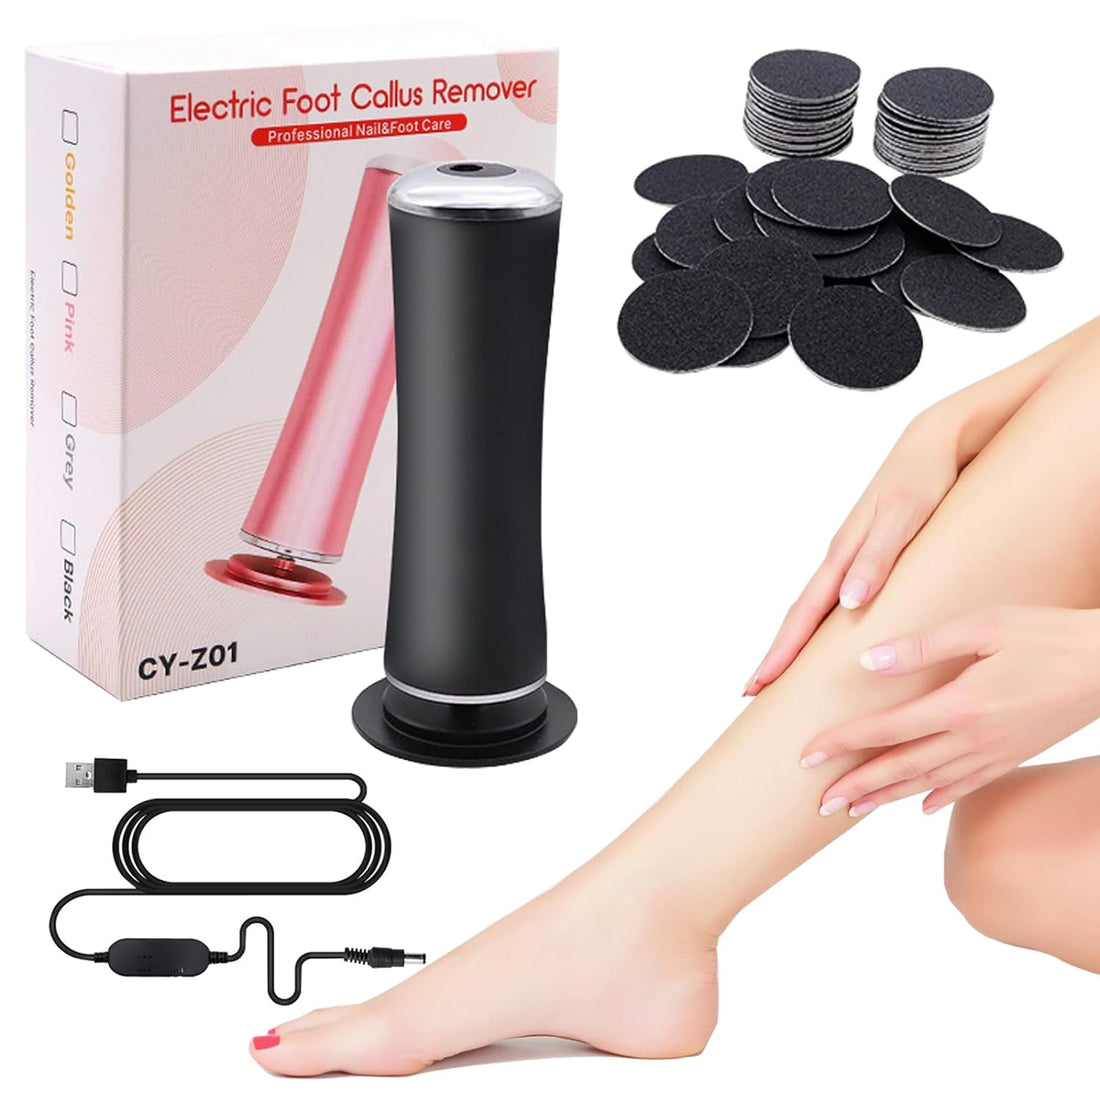 Electric Foot Callus Remover,LXIANGN Electronic Foot File Grinder with Speed Adjustable and 60pcs Replacement Sandpaper Discs,Pedicure Foot File Sander for Men Women Dead Cracked Hard Skin Calluses